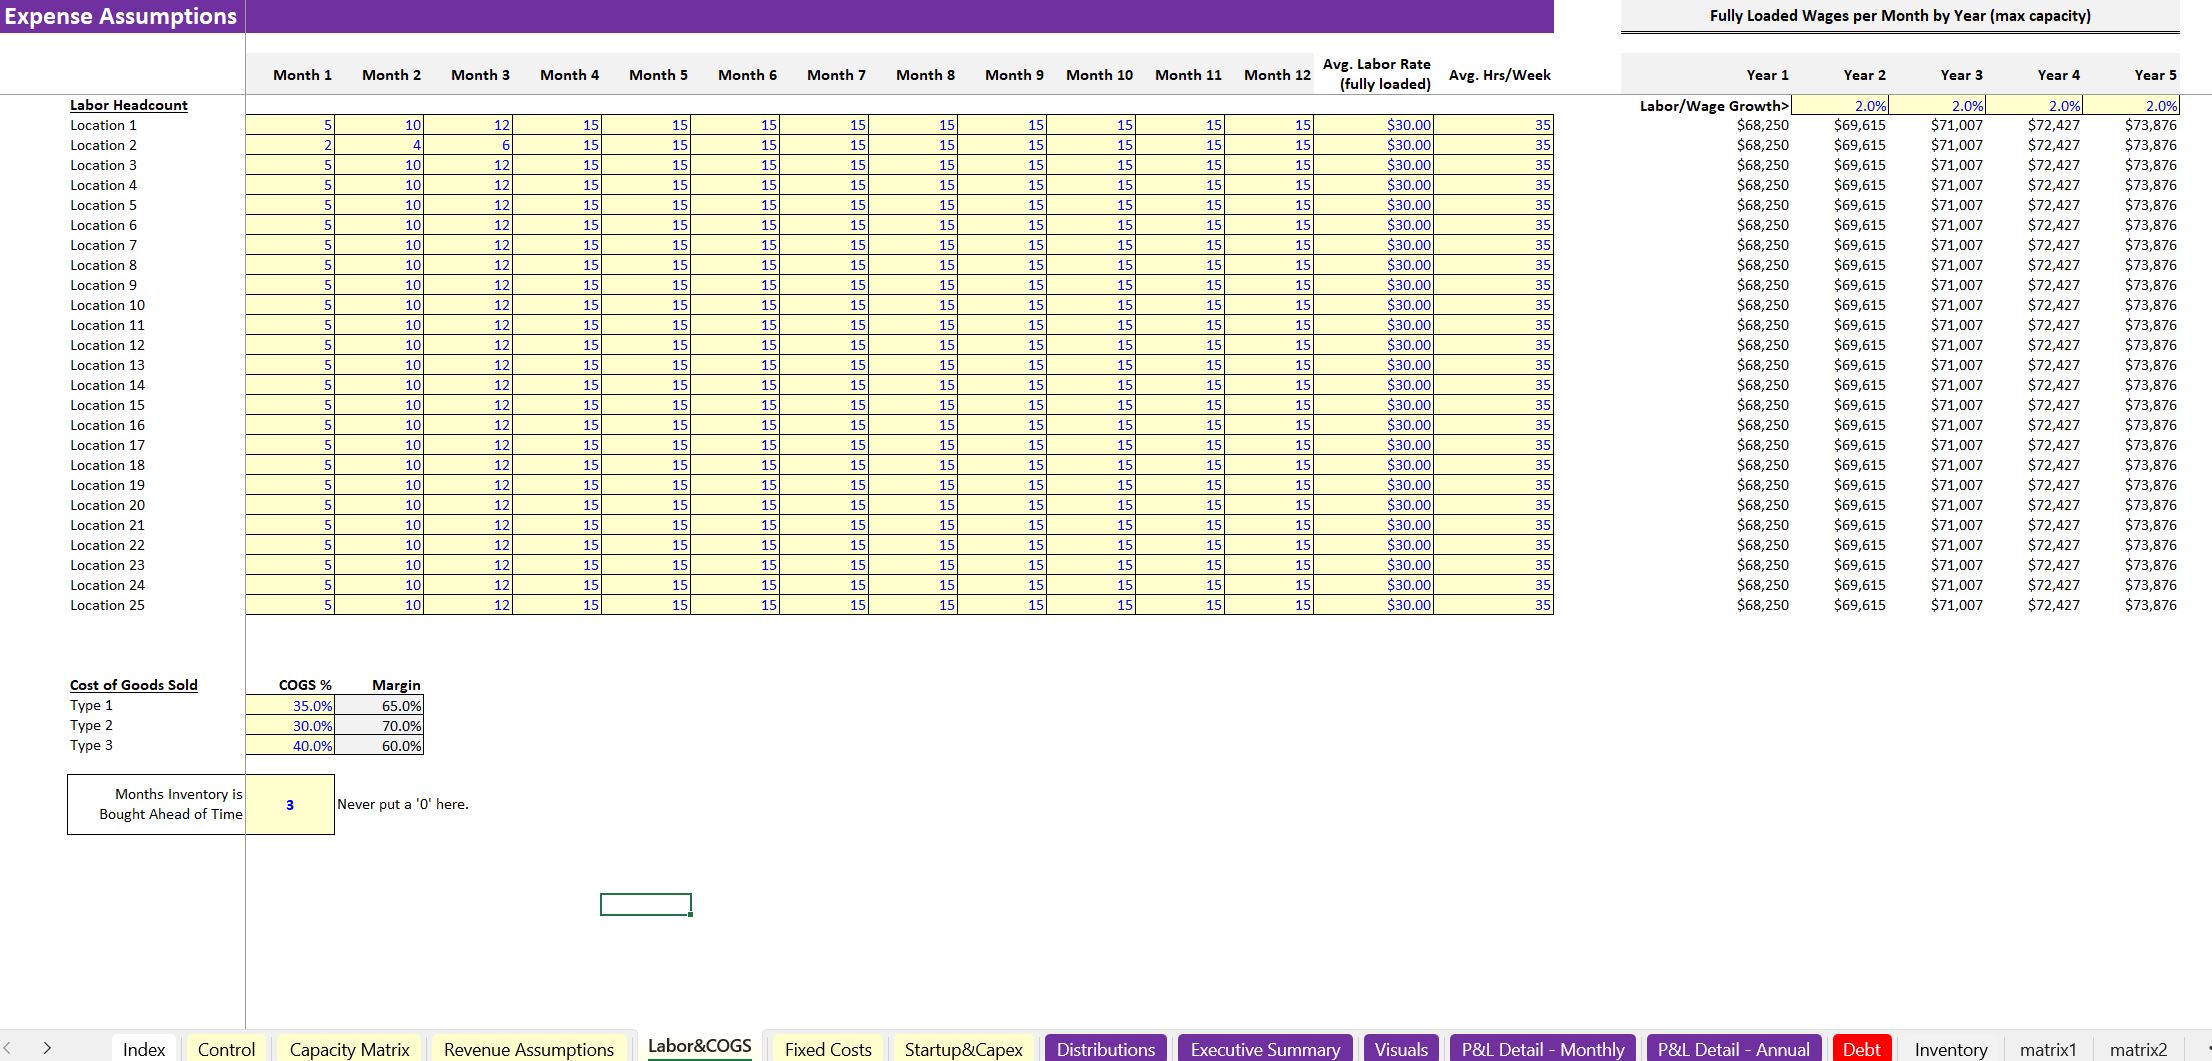 Scaling Up to 25 Retail Locations: Financial Model (Excel workbook (XLSX)) Preview Image